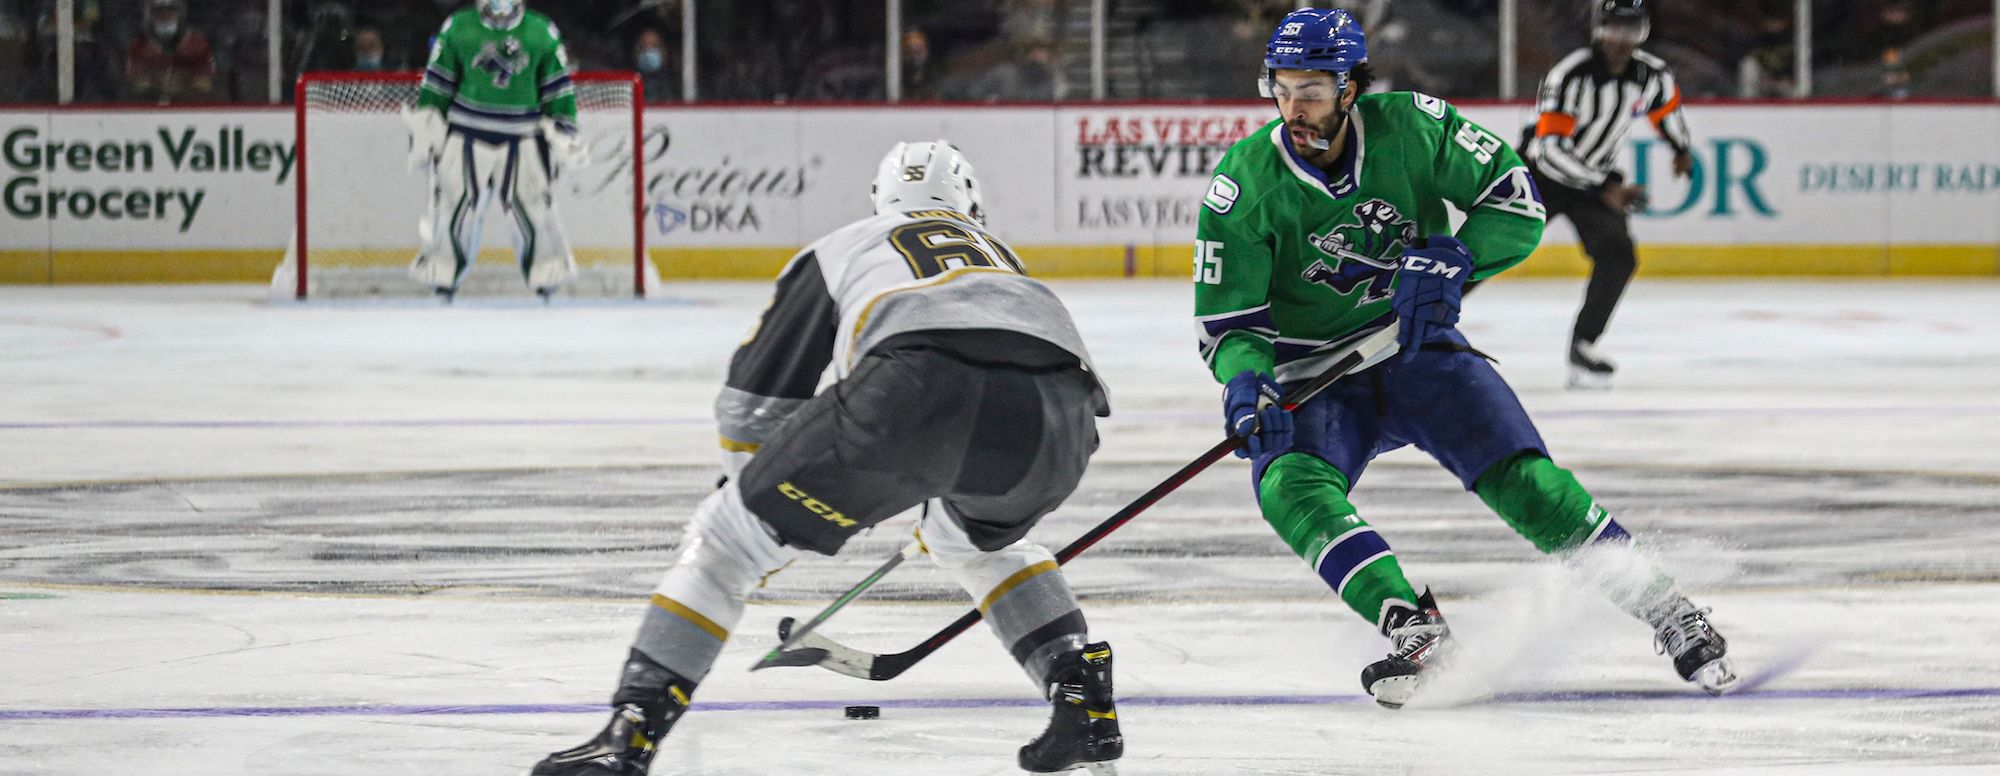 Canucks officially relocate AHL team to Abbotsford for next season